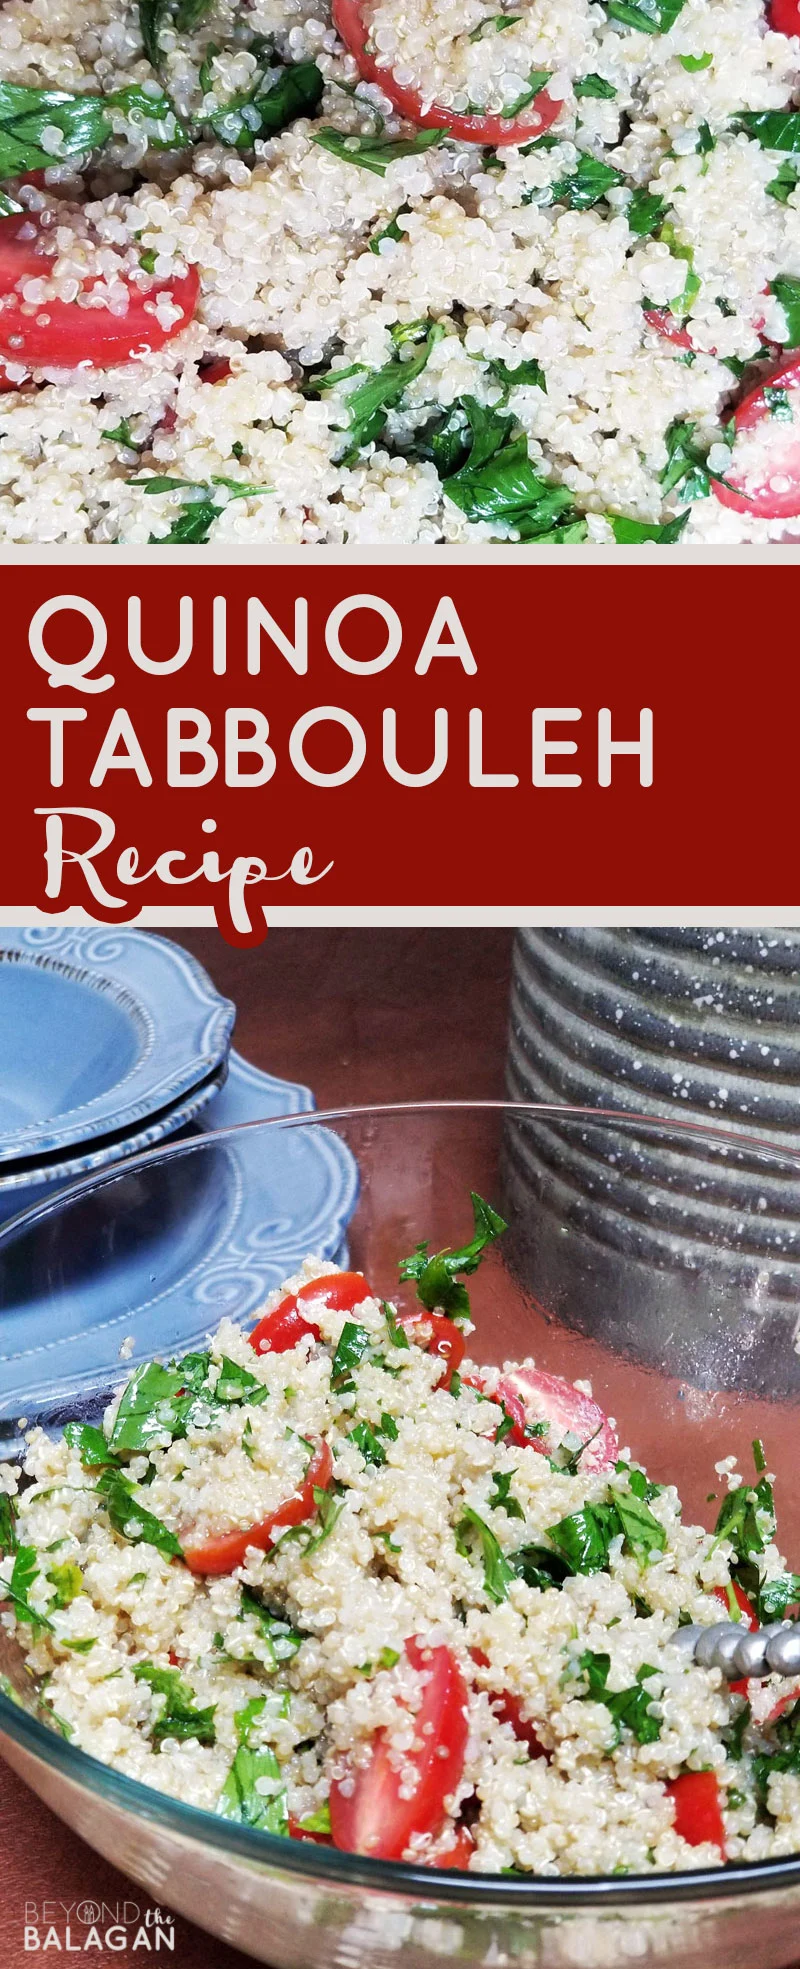 Looking for a delicious healthy salad recipe that's also filling? Try this yummy quinoa tabbouleh salad recipe - a middle eastern dish that's deliciously herby and will help you use up your parsley from your garden. #parsley #tabbouleh #salad